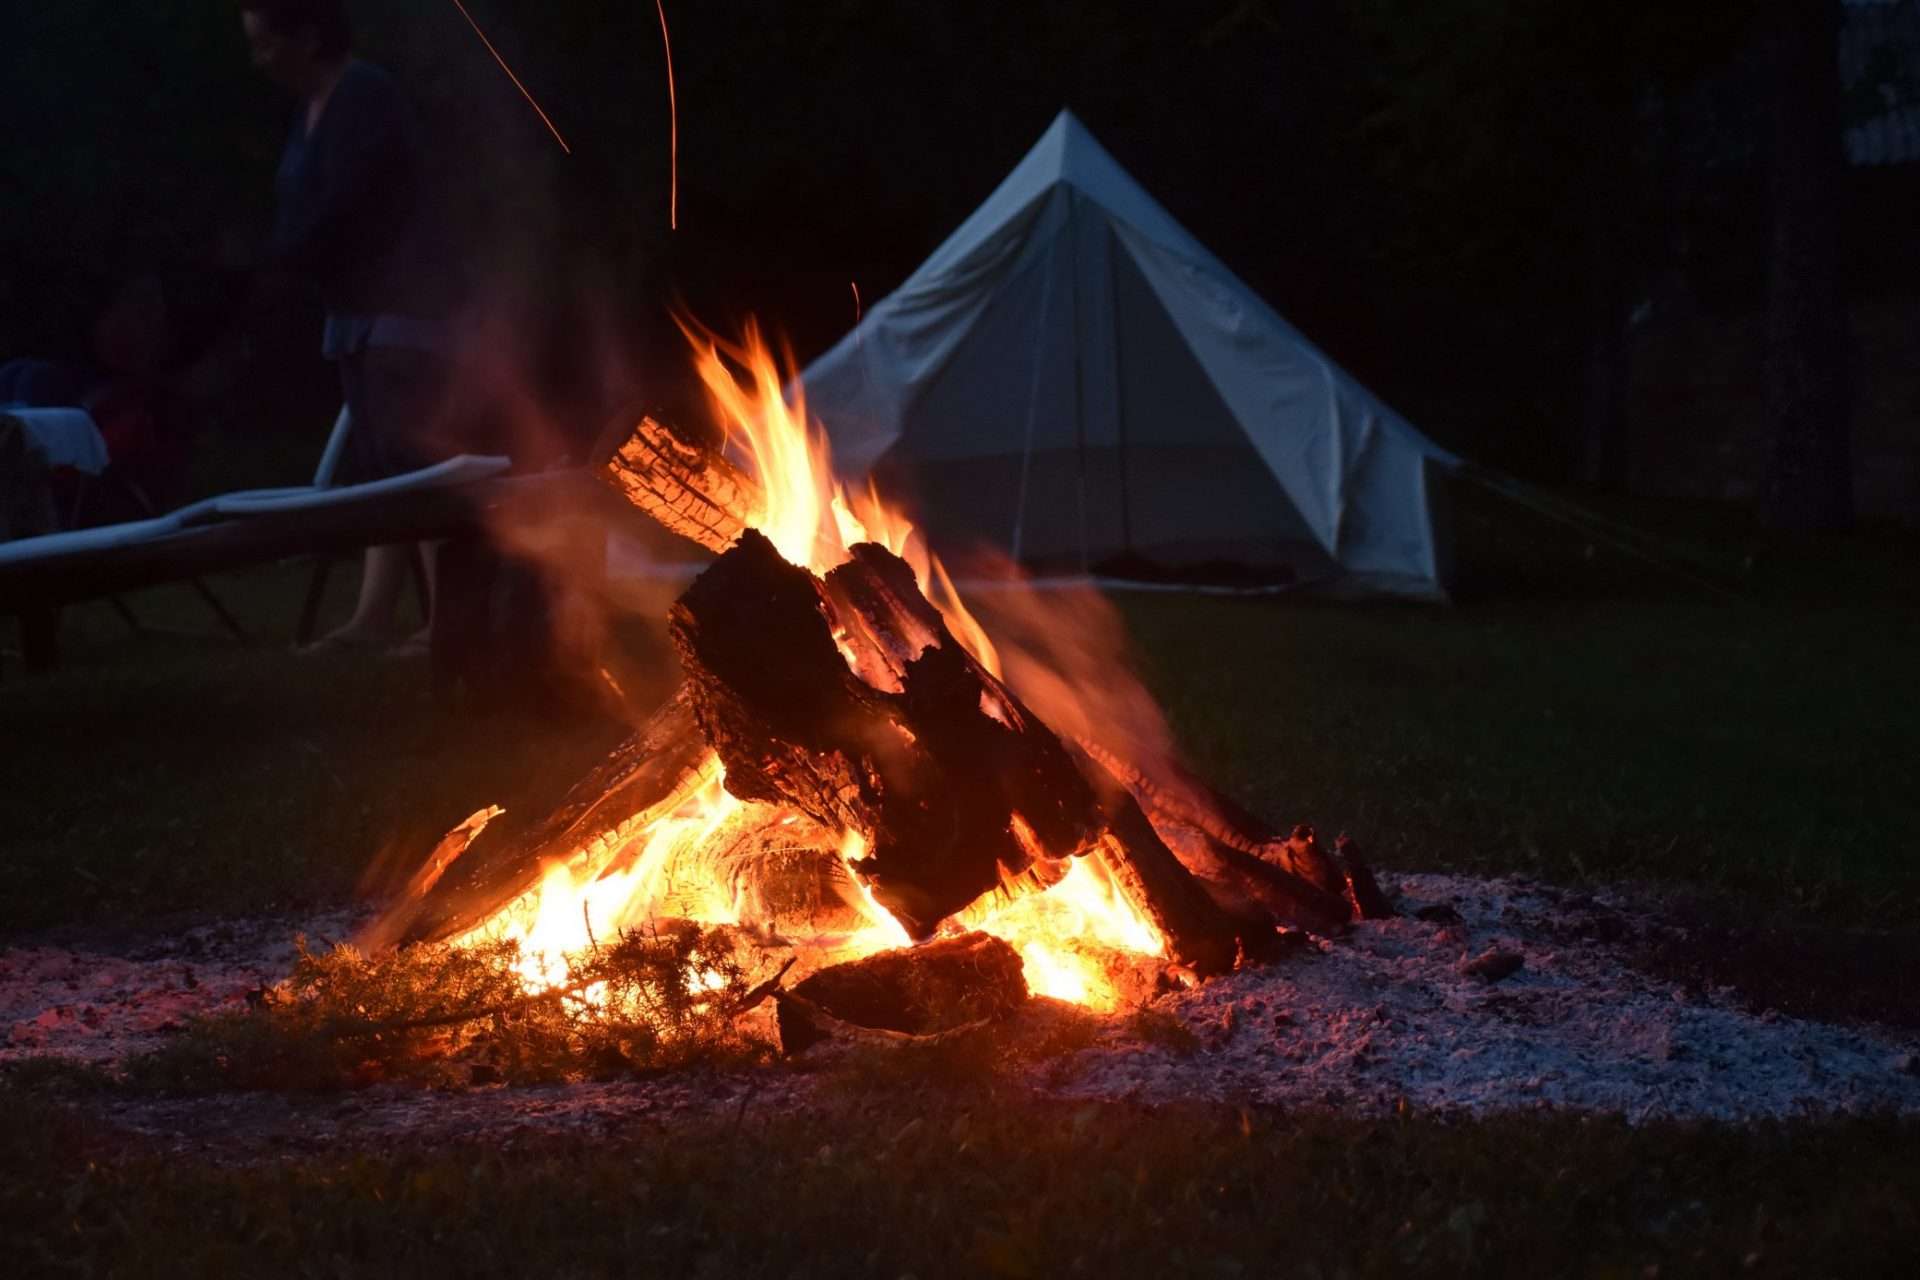 Campfire in front of tent